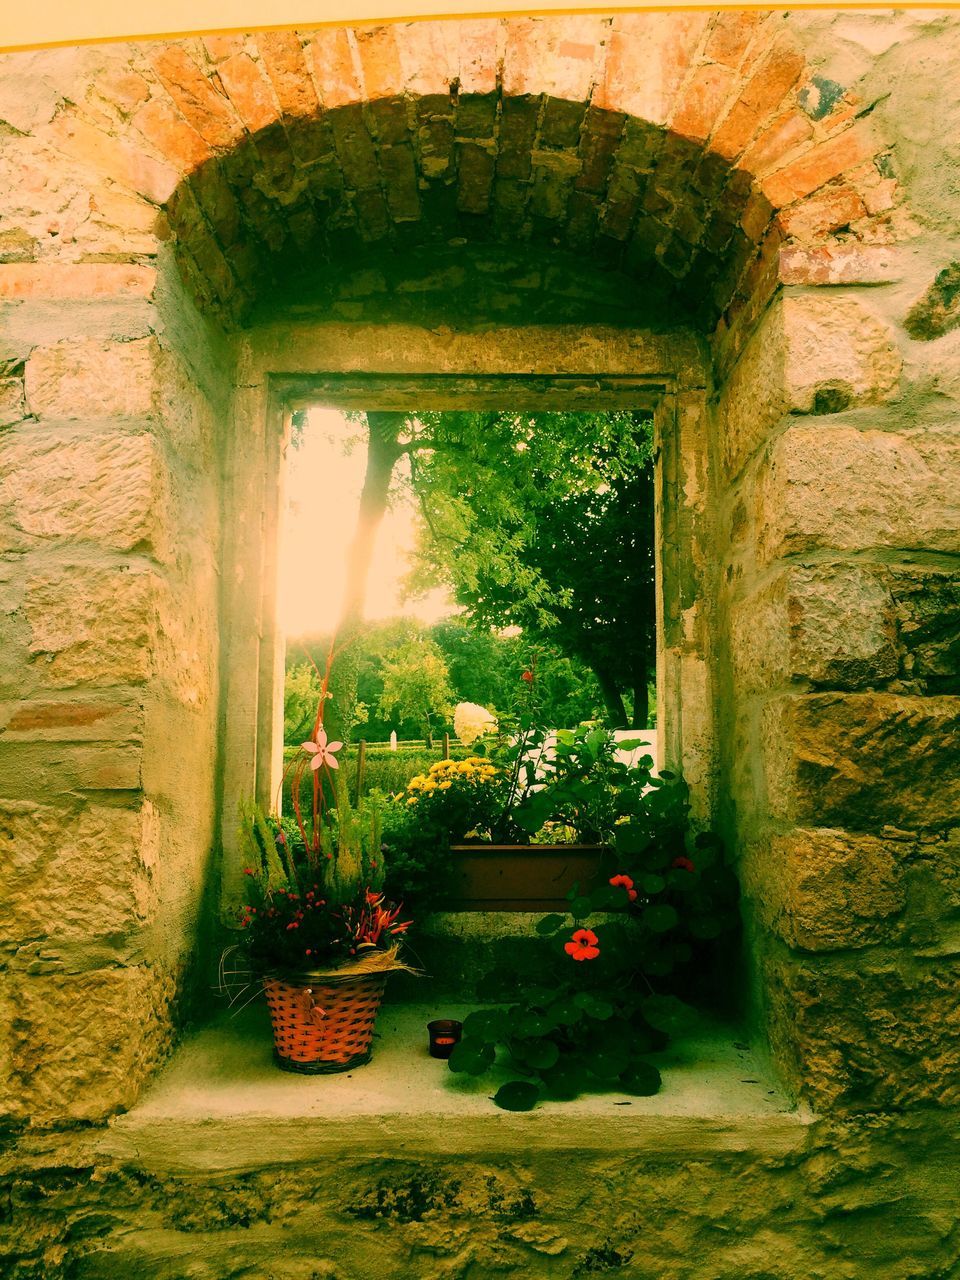 built structure, architecture, arch, building exterior, plant, indoors, place of worship, religion, entrance, house, flower, history, window, day, spirituality, green color, old, growth, stone wall, grass